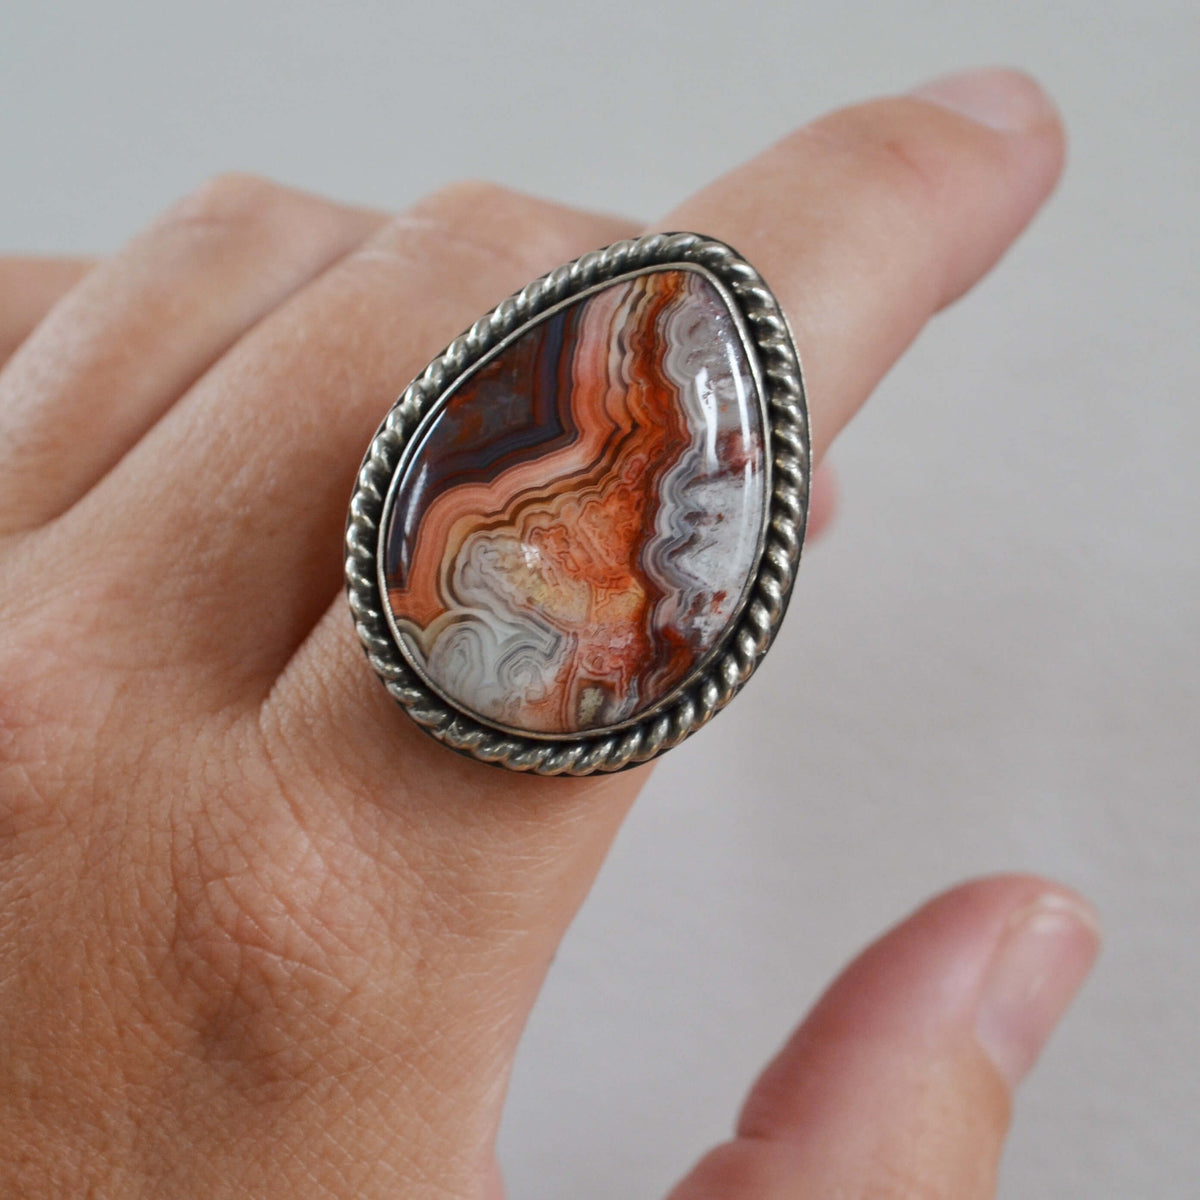 Laguna Lace Pear Shaped Agate Sterling Silver Ring, One of a Kind